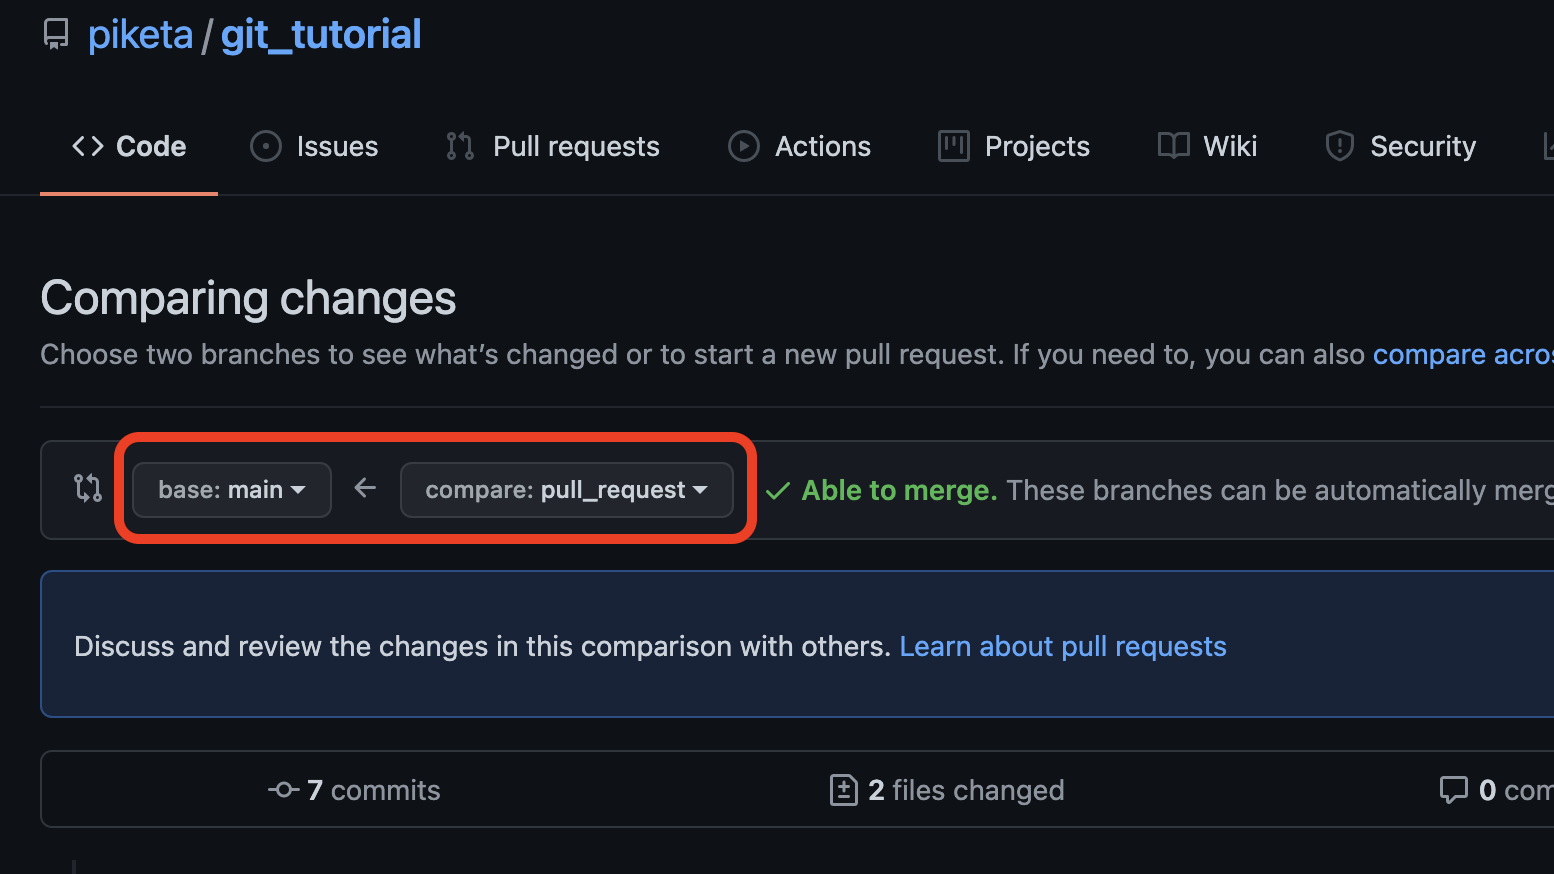 New pull request